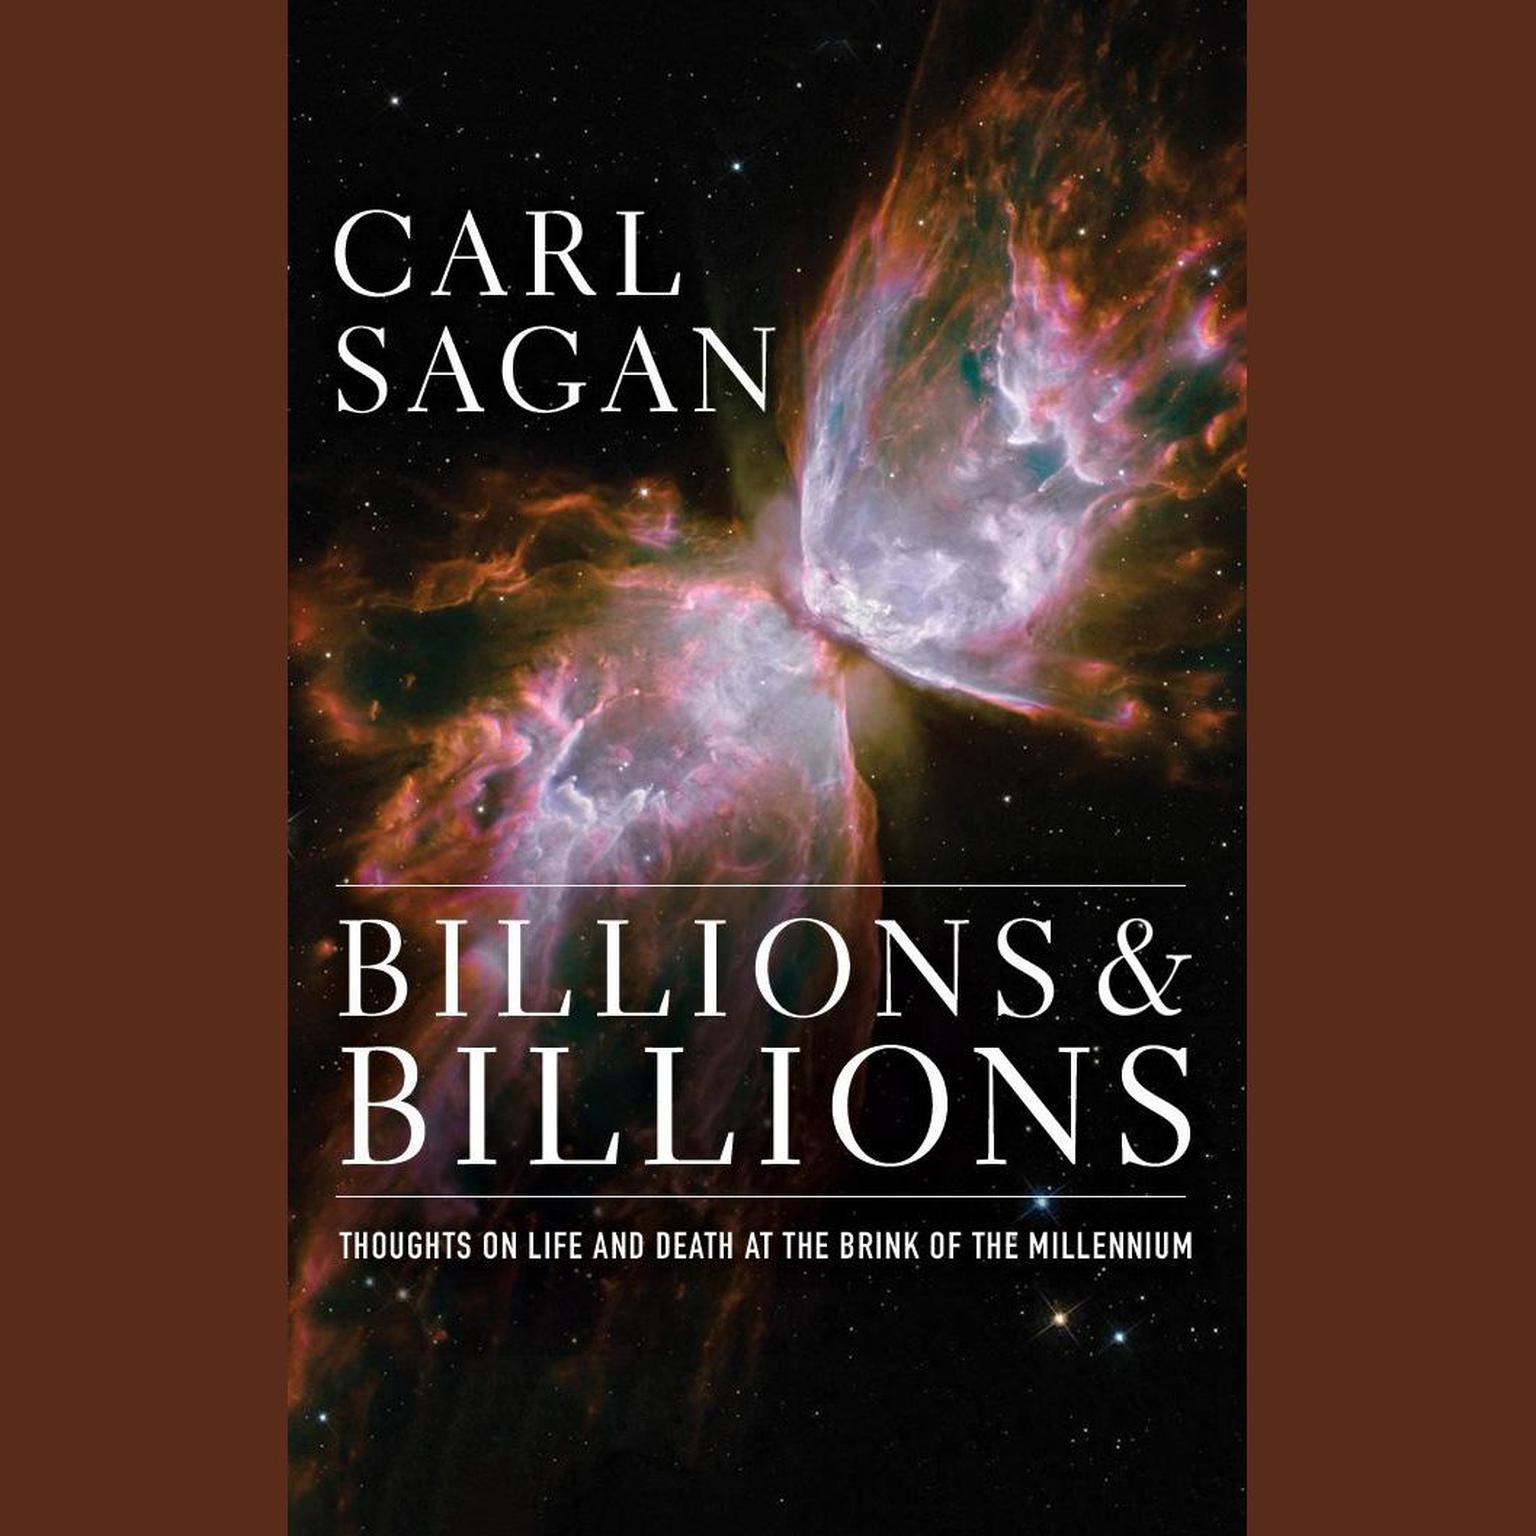 Billions & Billions: Thoughts on Life and Death at the Brink of the Millennium Audiobook, by Carl Sagan